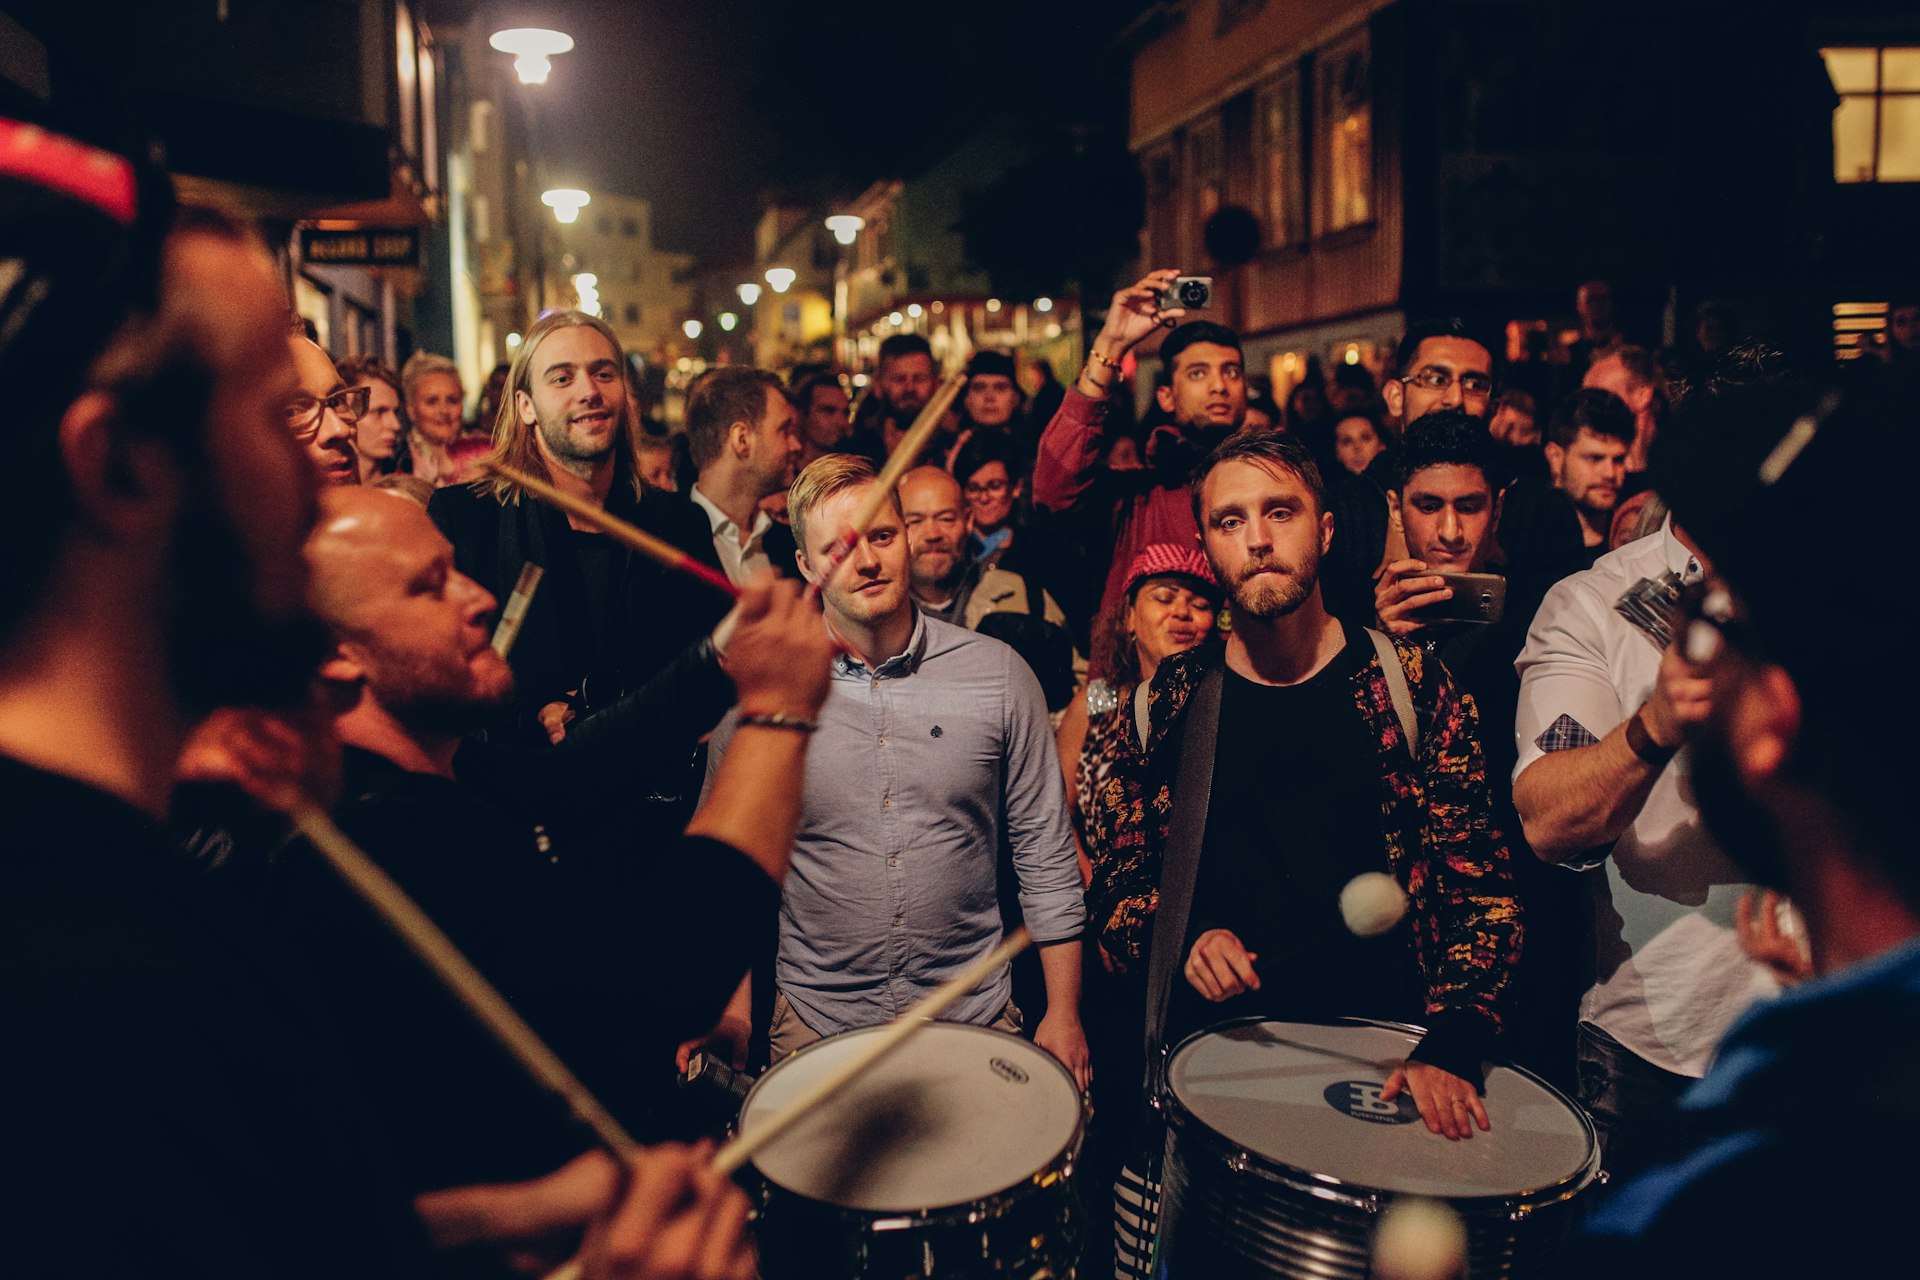 Drummers playing to a crowd of people in the street at night